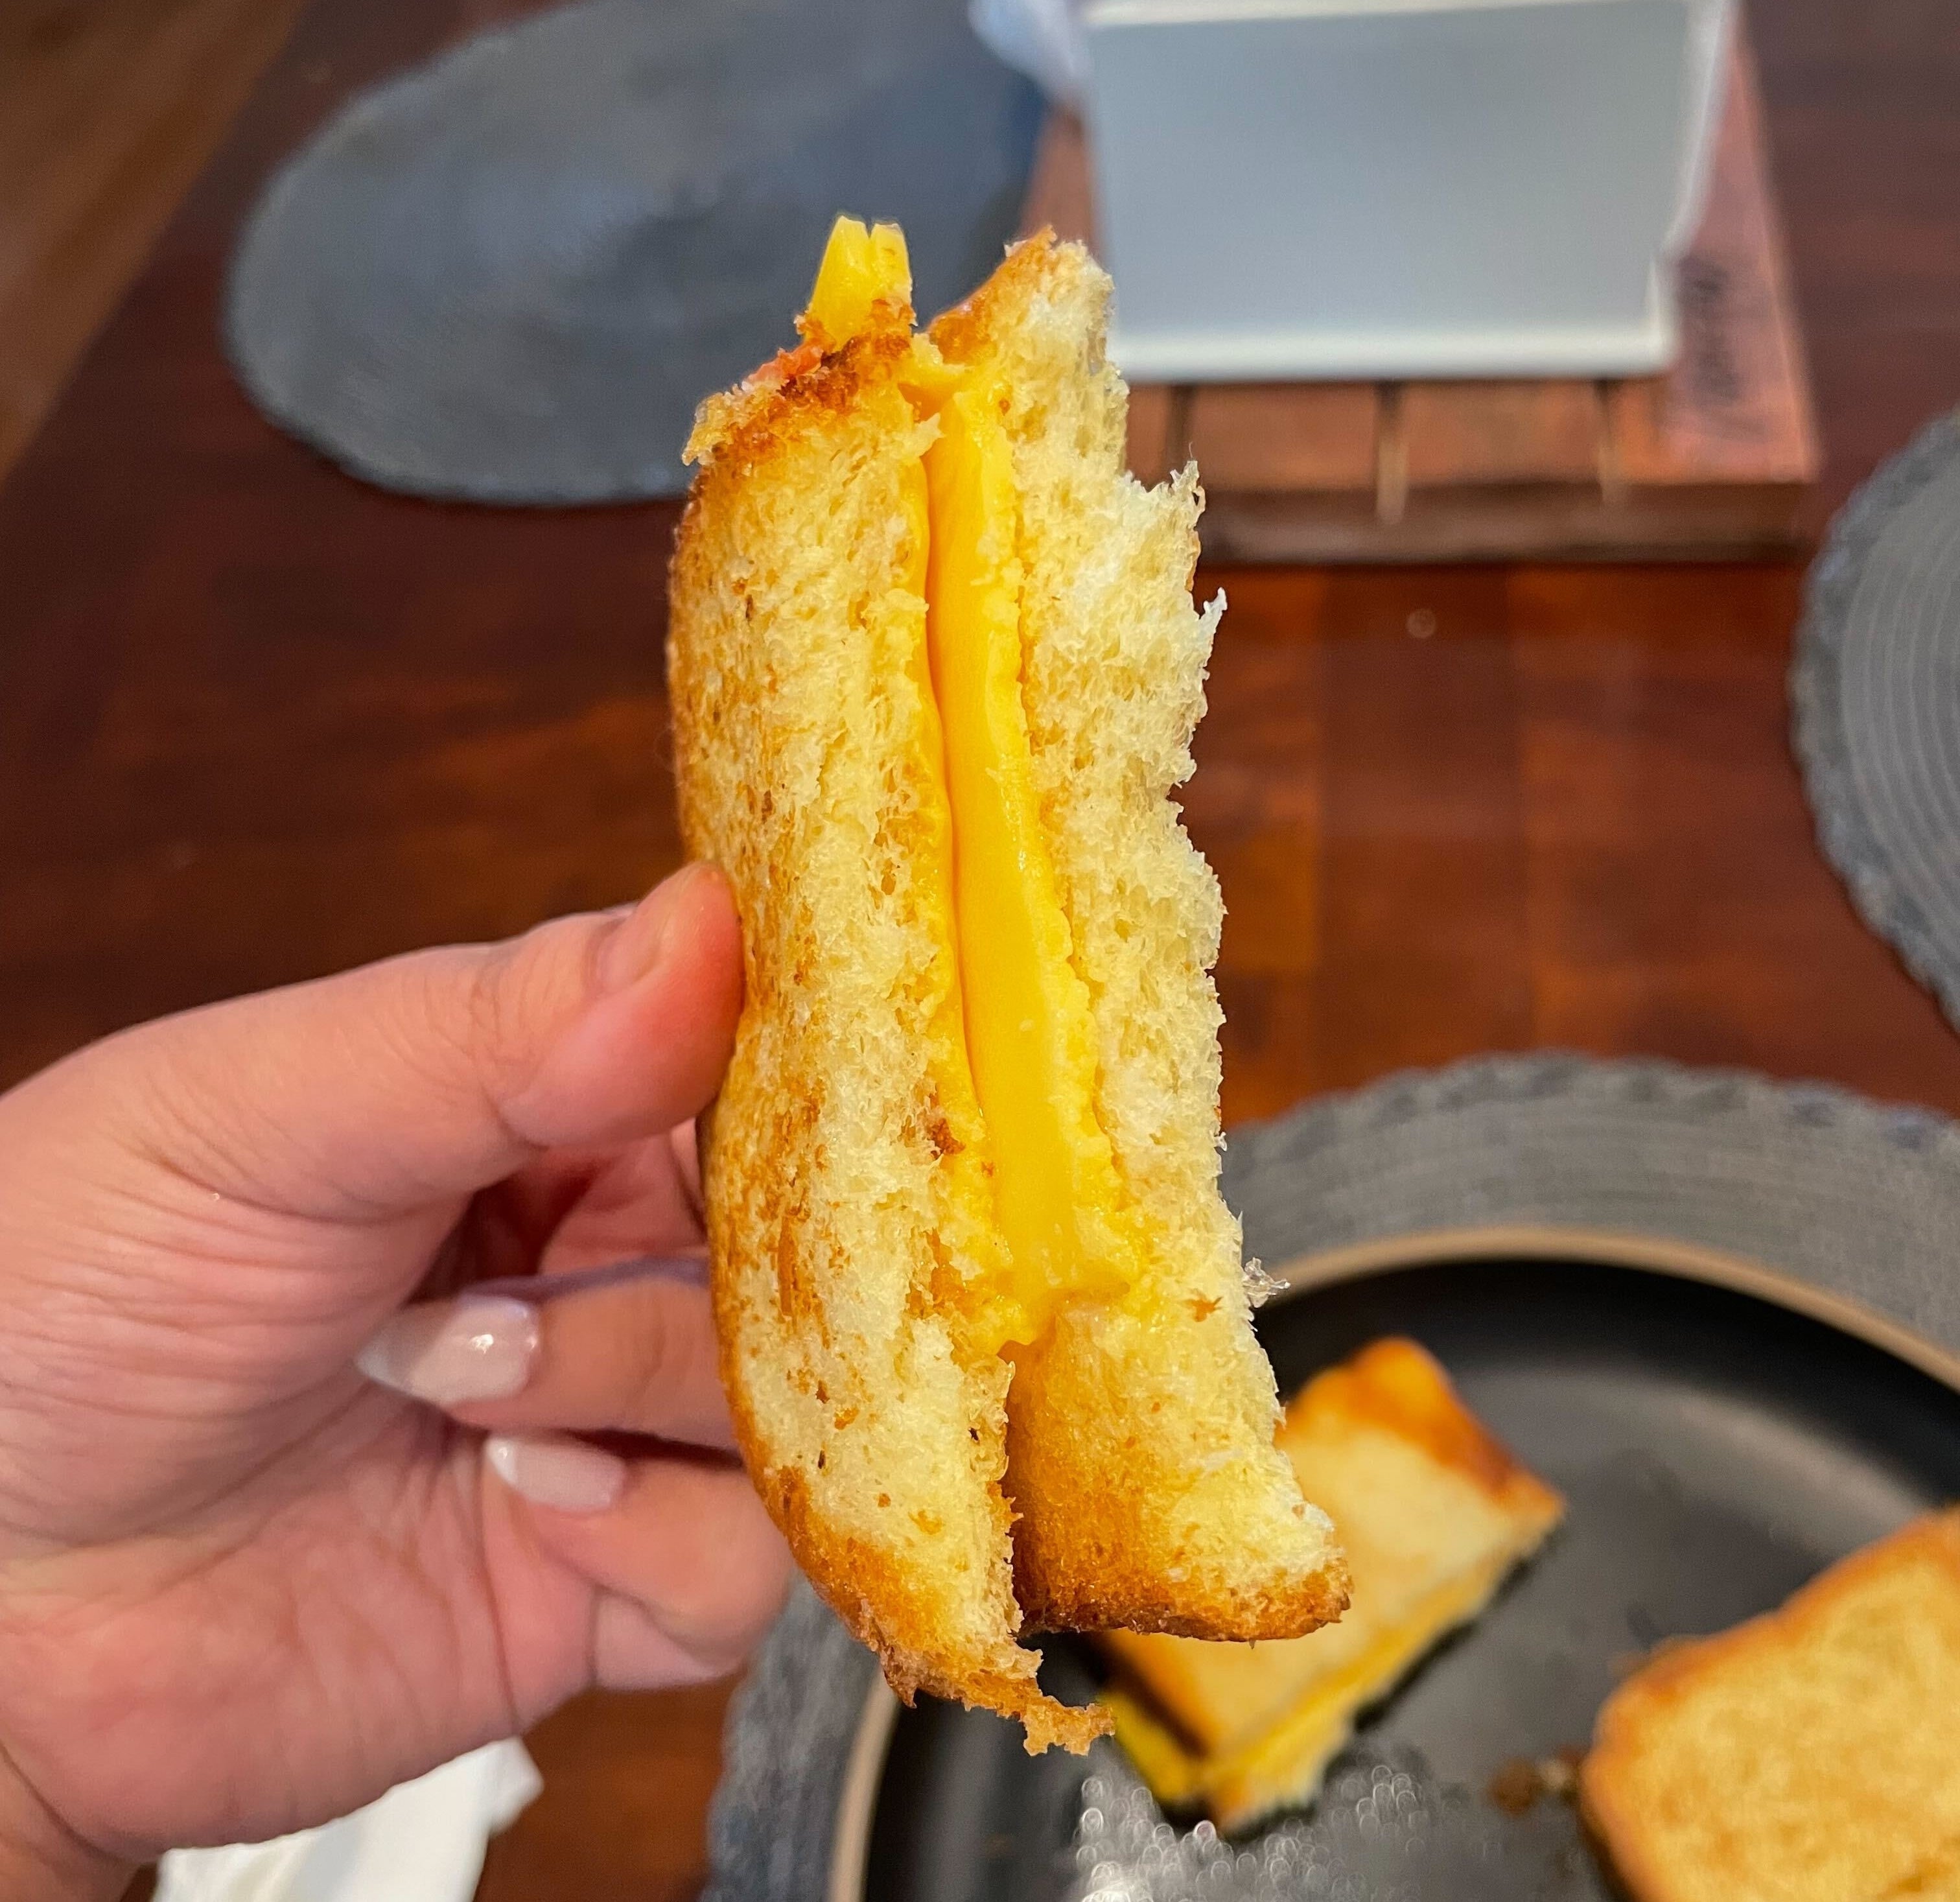 Person holding a half-eaten grilled cheese sandwich, with not-so-melted cheese visible